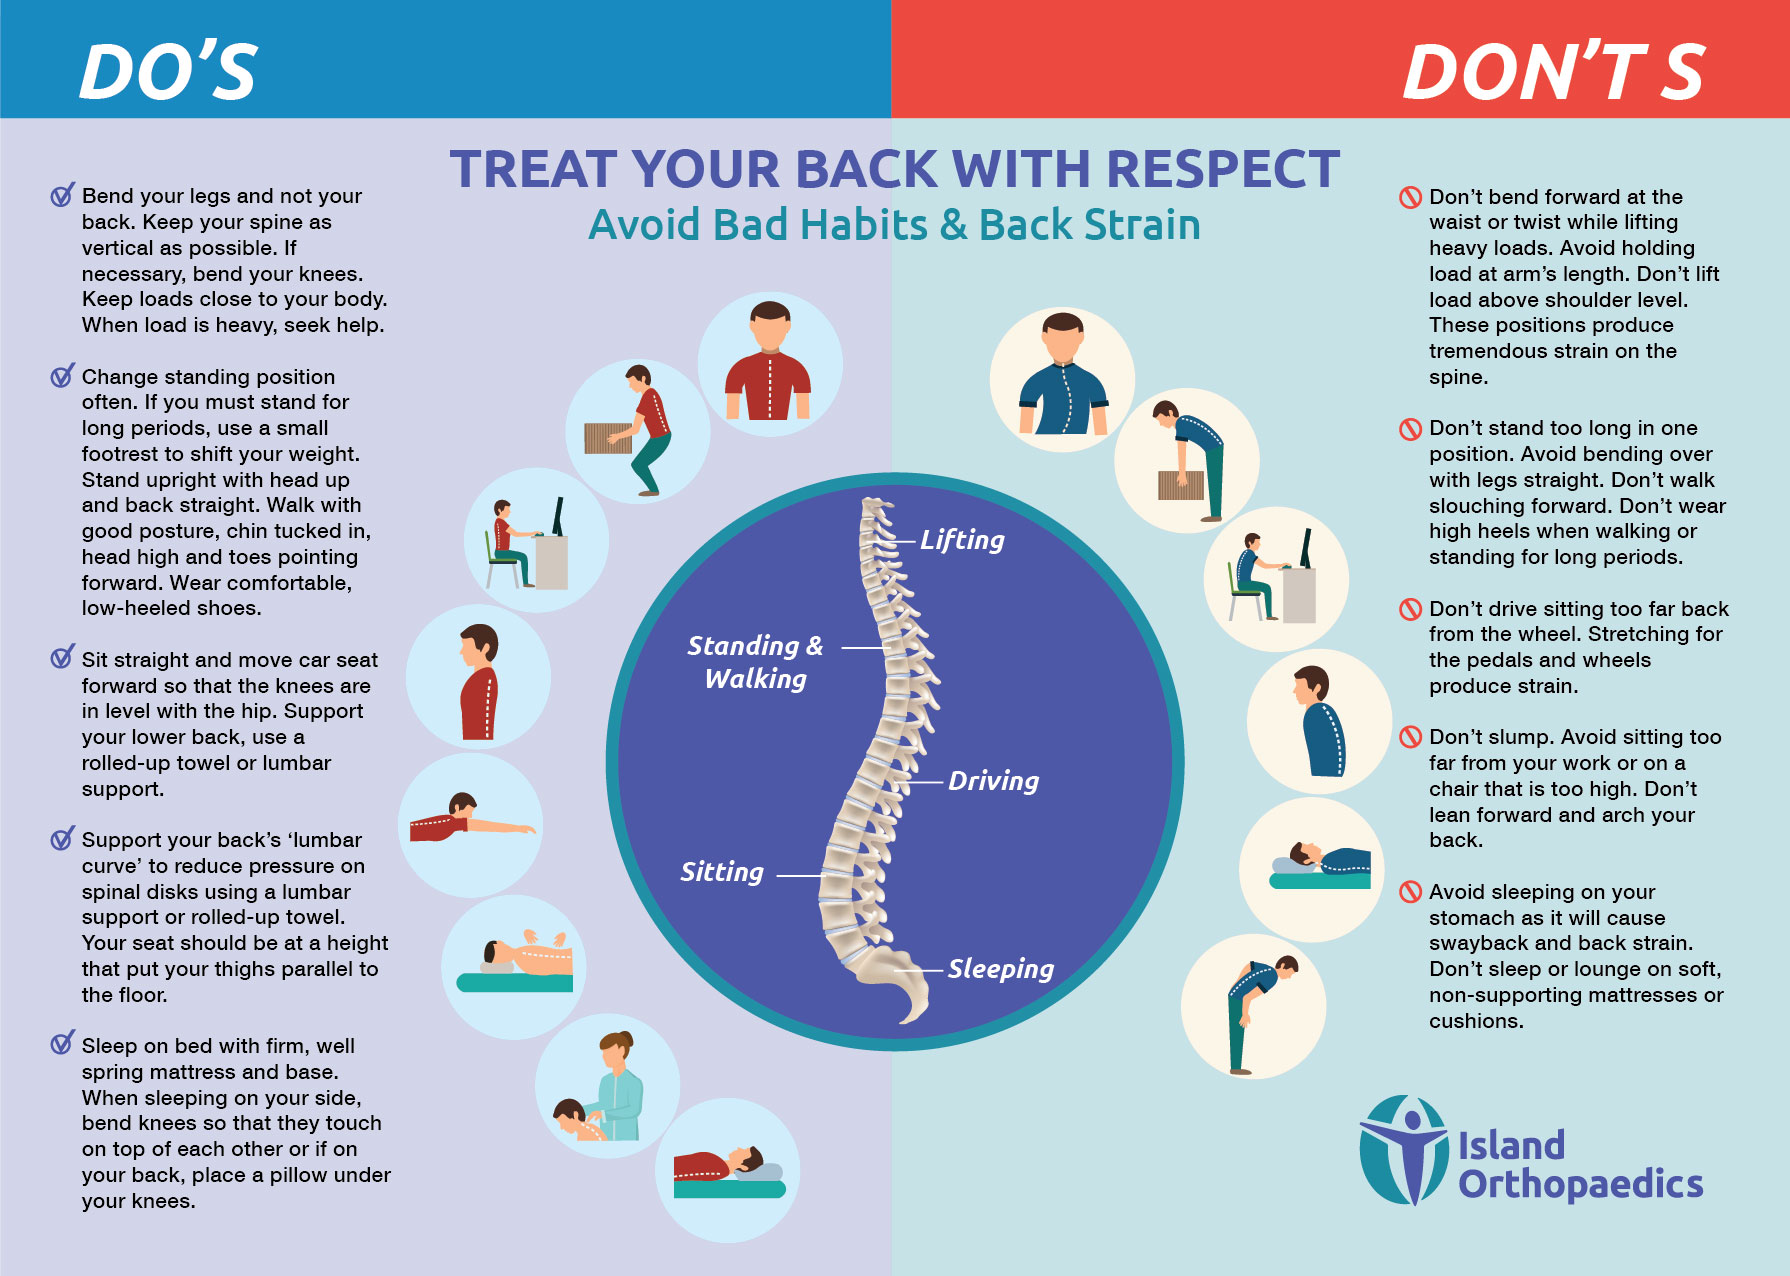 Treat Your Back: Avoid bad habits and back strain - Healthway Medical